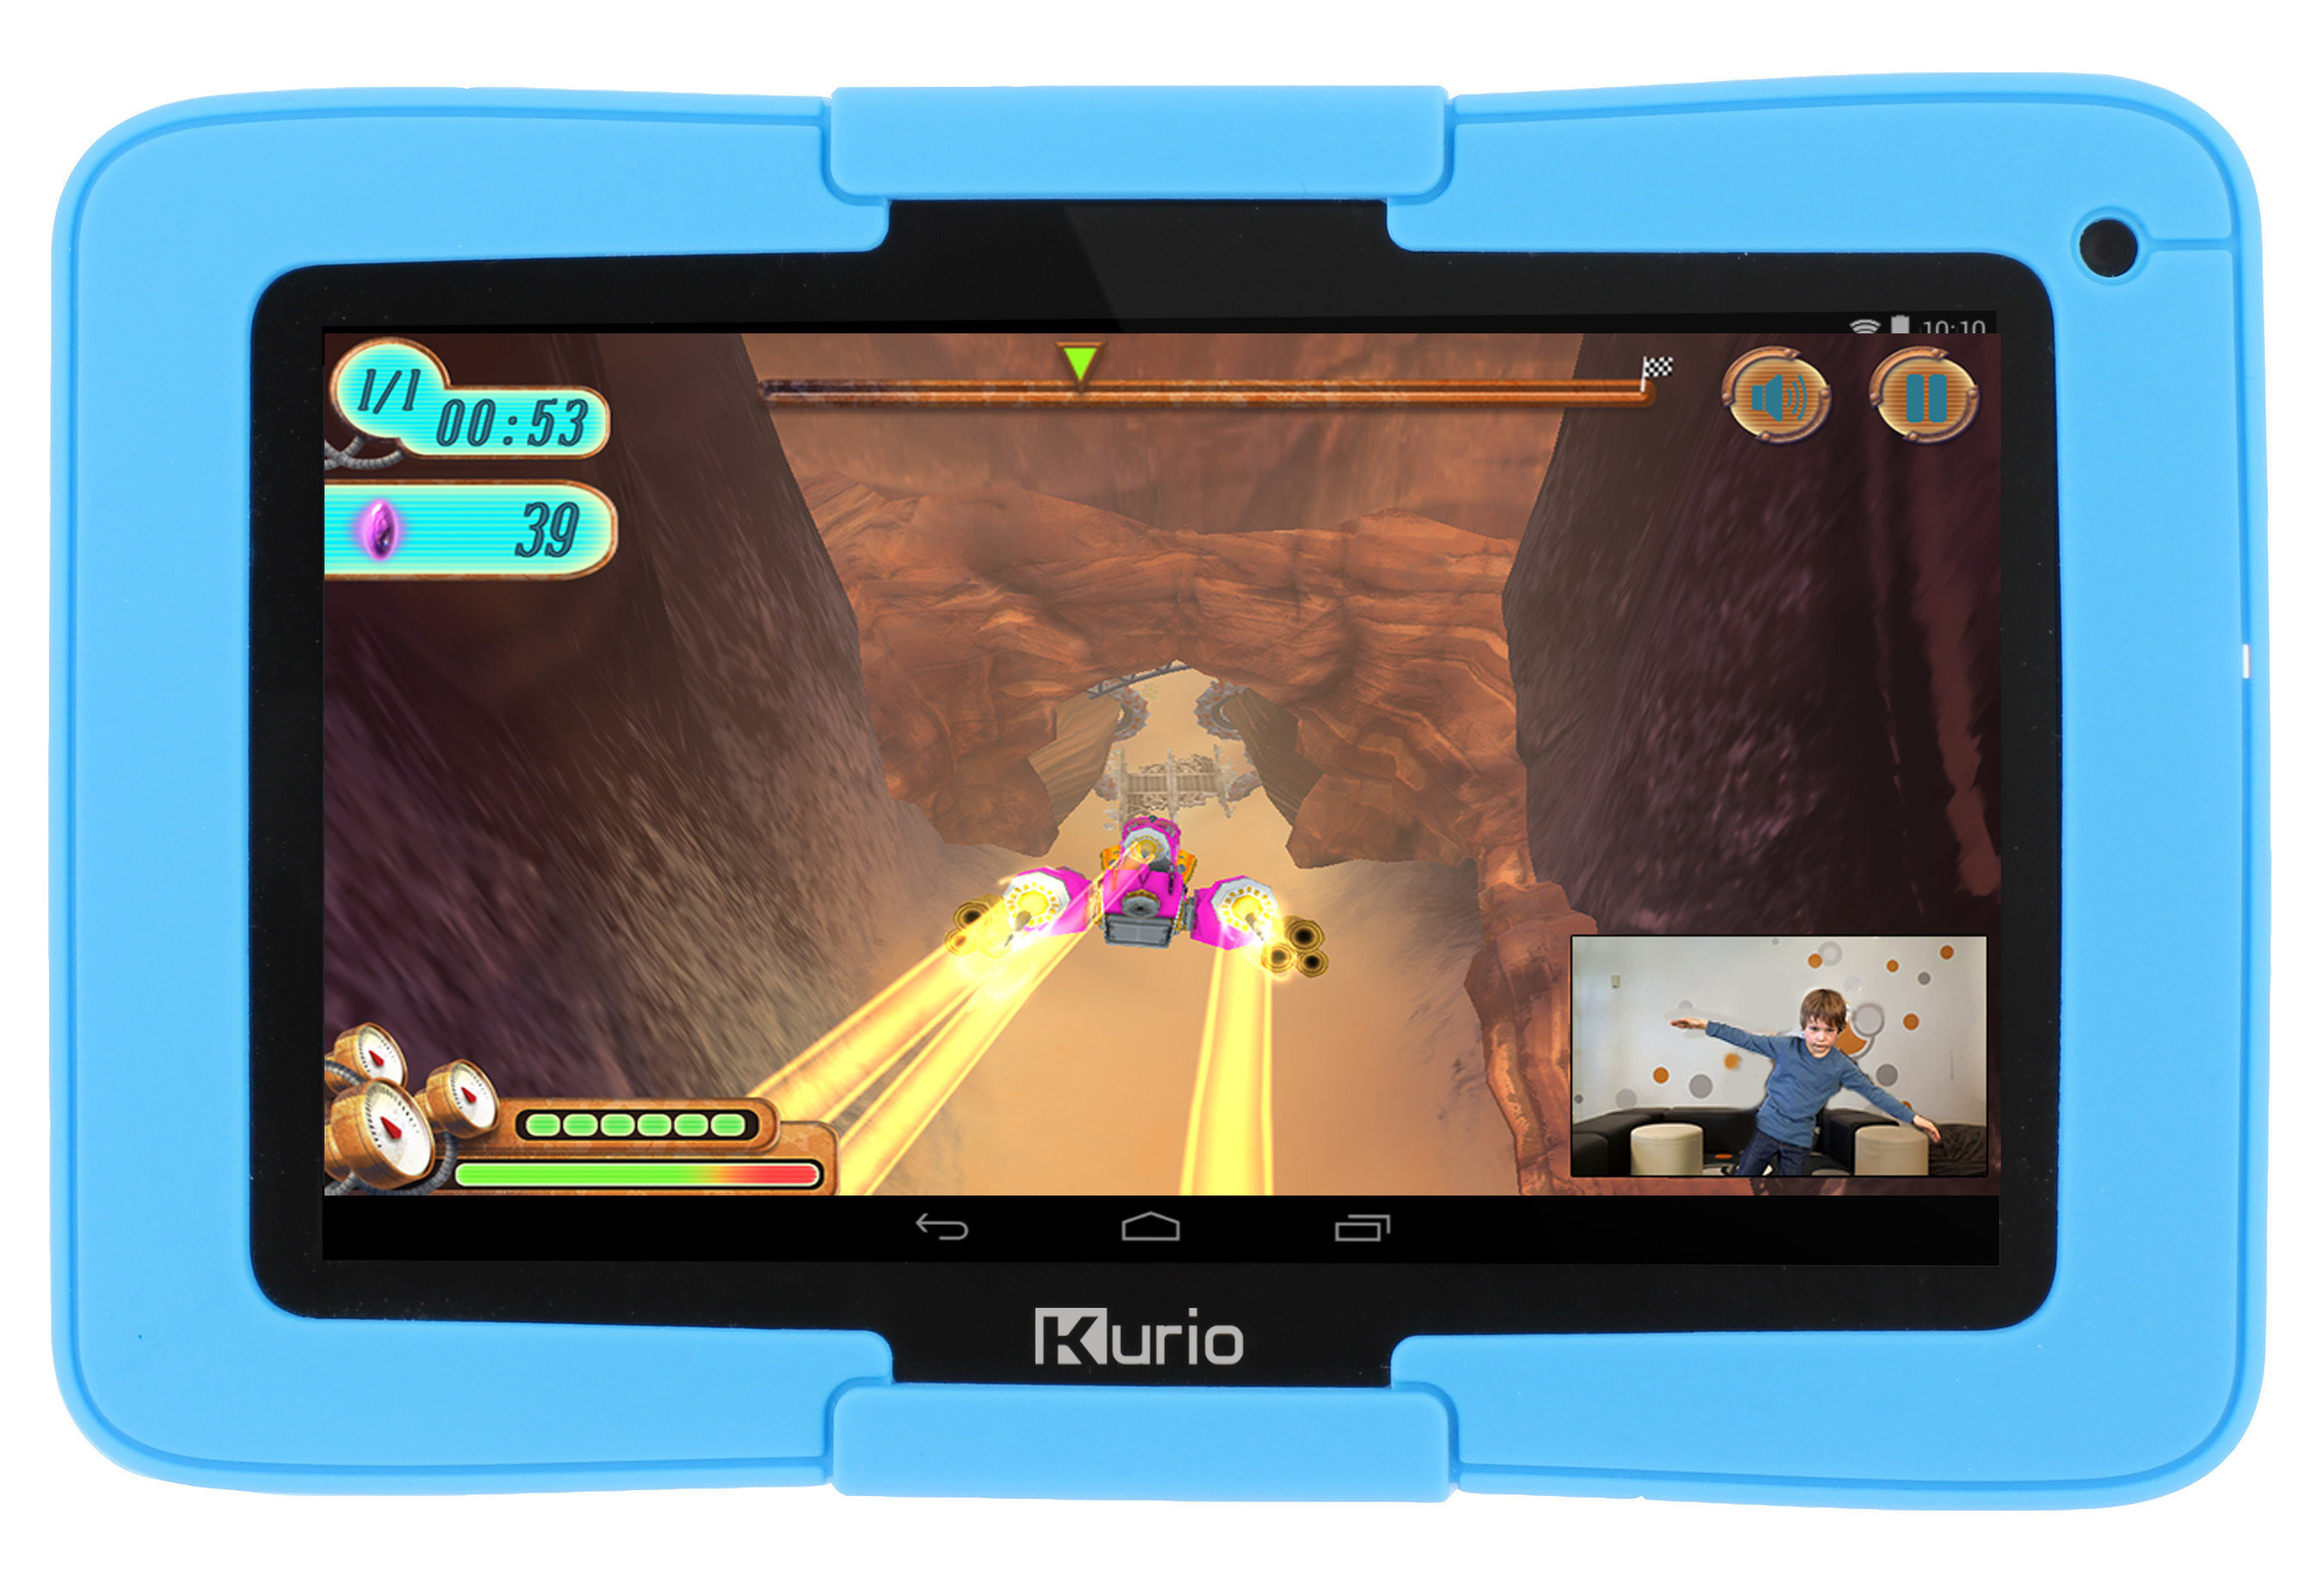 Kurio Xtreme introduces exclusive Kurio Motion gaming - the first body-controlled games on a tablet.  The advanced kid tablet comes preloaded with 10 Kurio Motion games that will get kids jumping, running and moving as they swim, ski, tend goal, space race and more.  The technology works using the tablet's camera alone, allowing games to be played anytime, anywhere.  No consoles, sensors, gaming controllers or TV is required.  A special Kurio Motion gaming stand is included with the device. (PRNewsFoto/Techno Source)